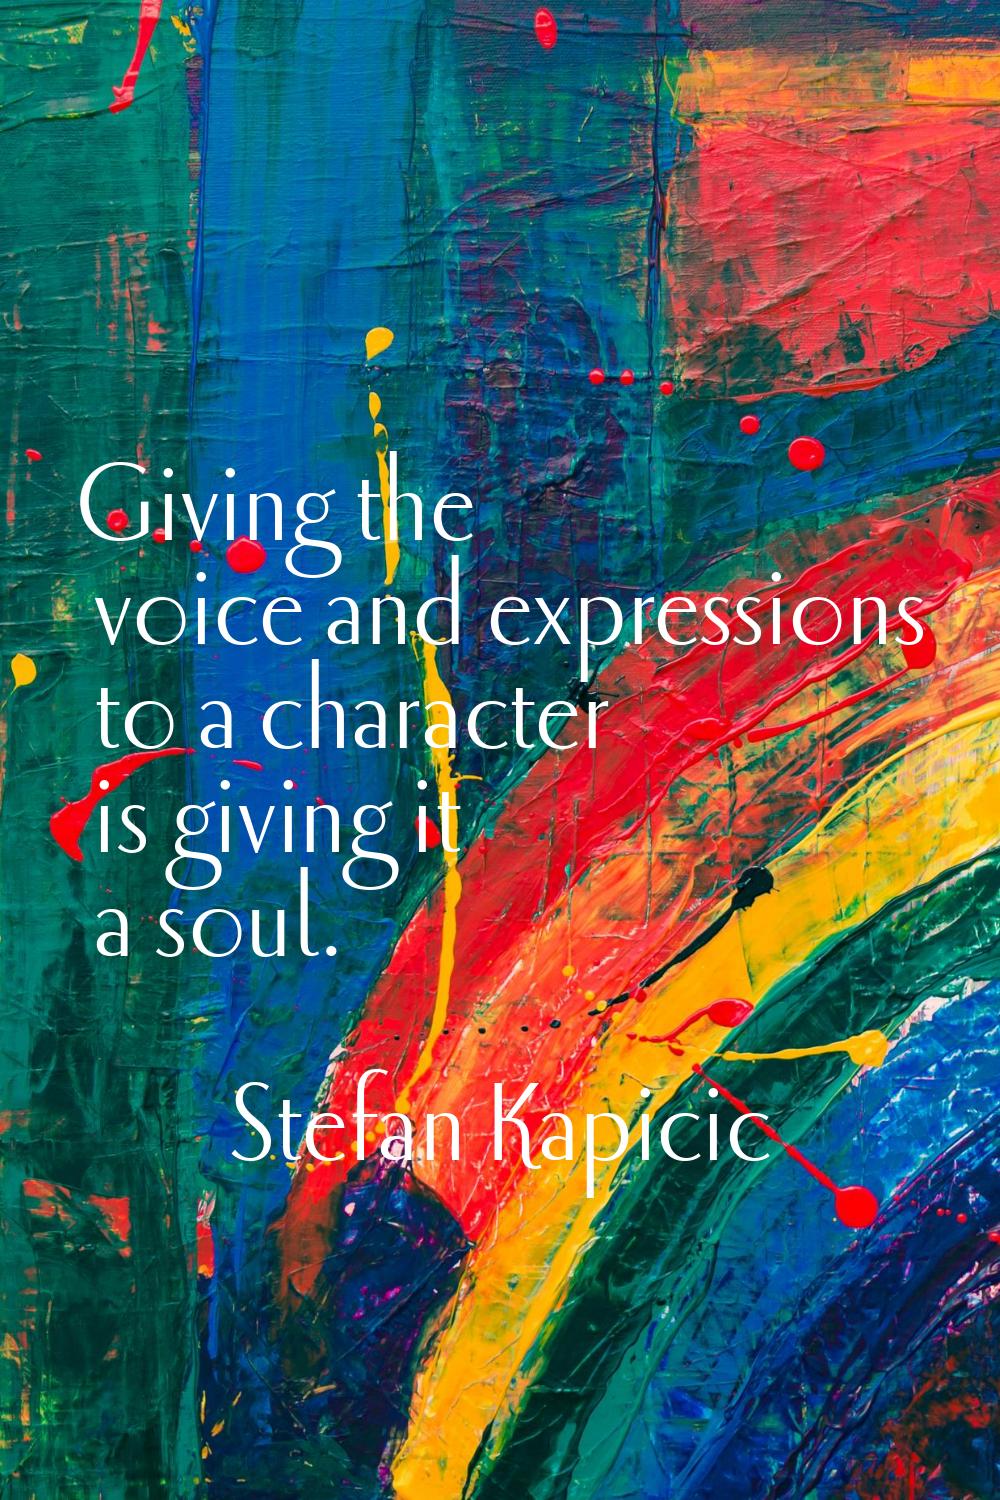 Giving the voice and expressions to a character is giving it a soul.